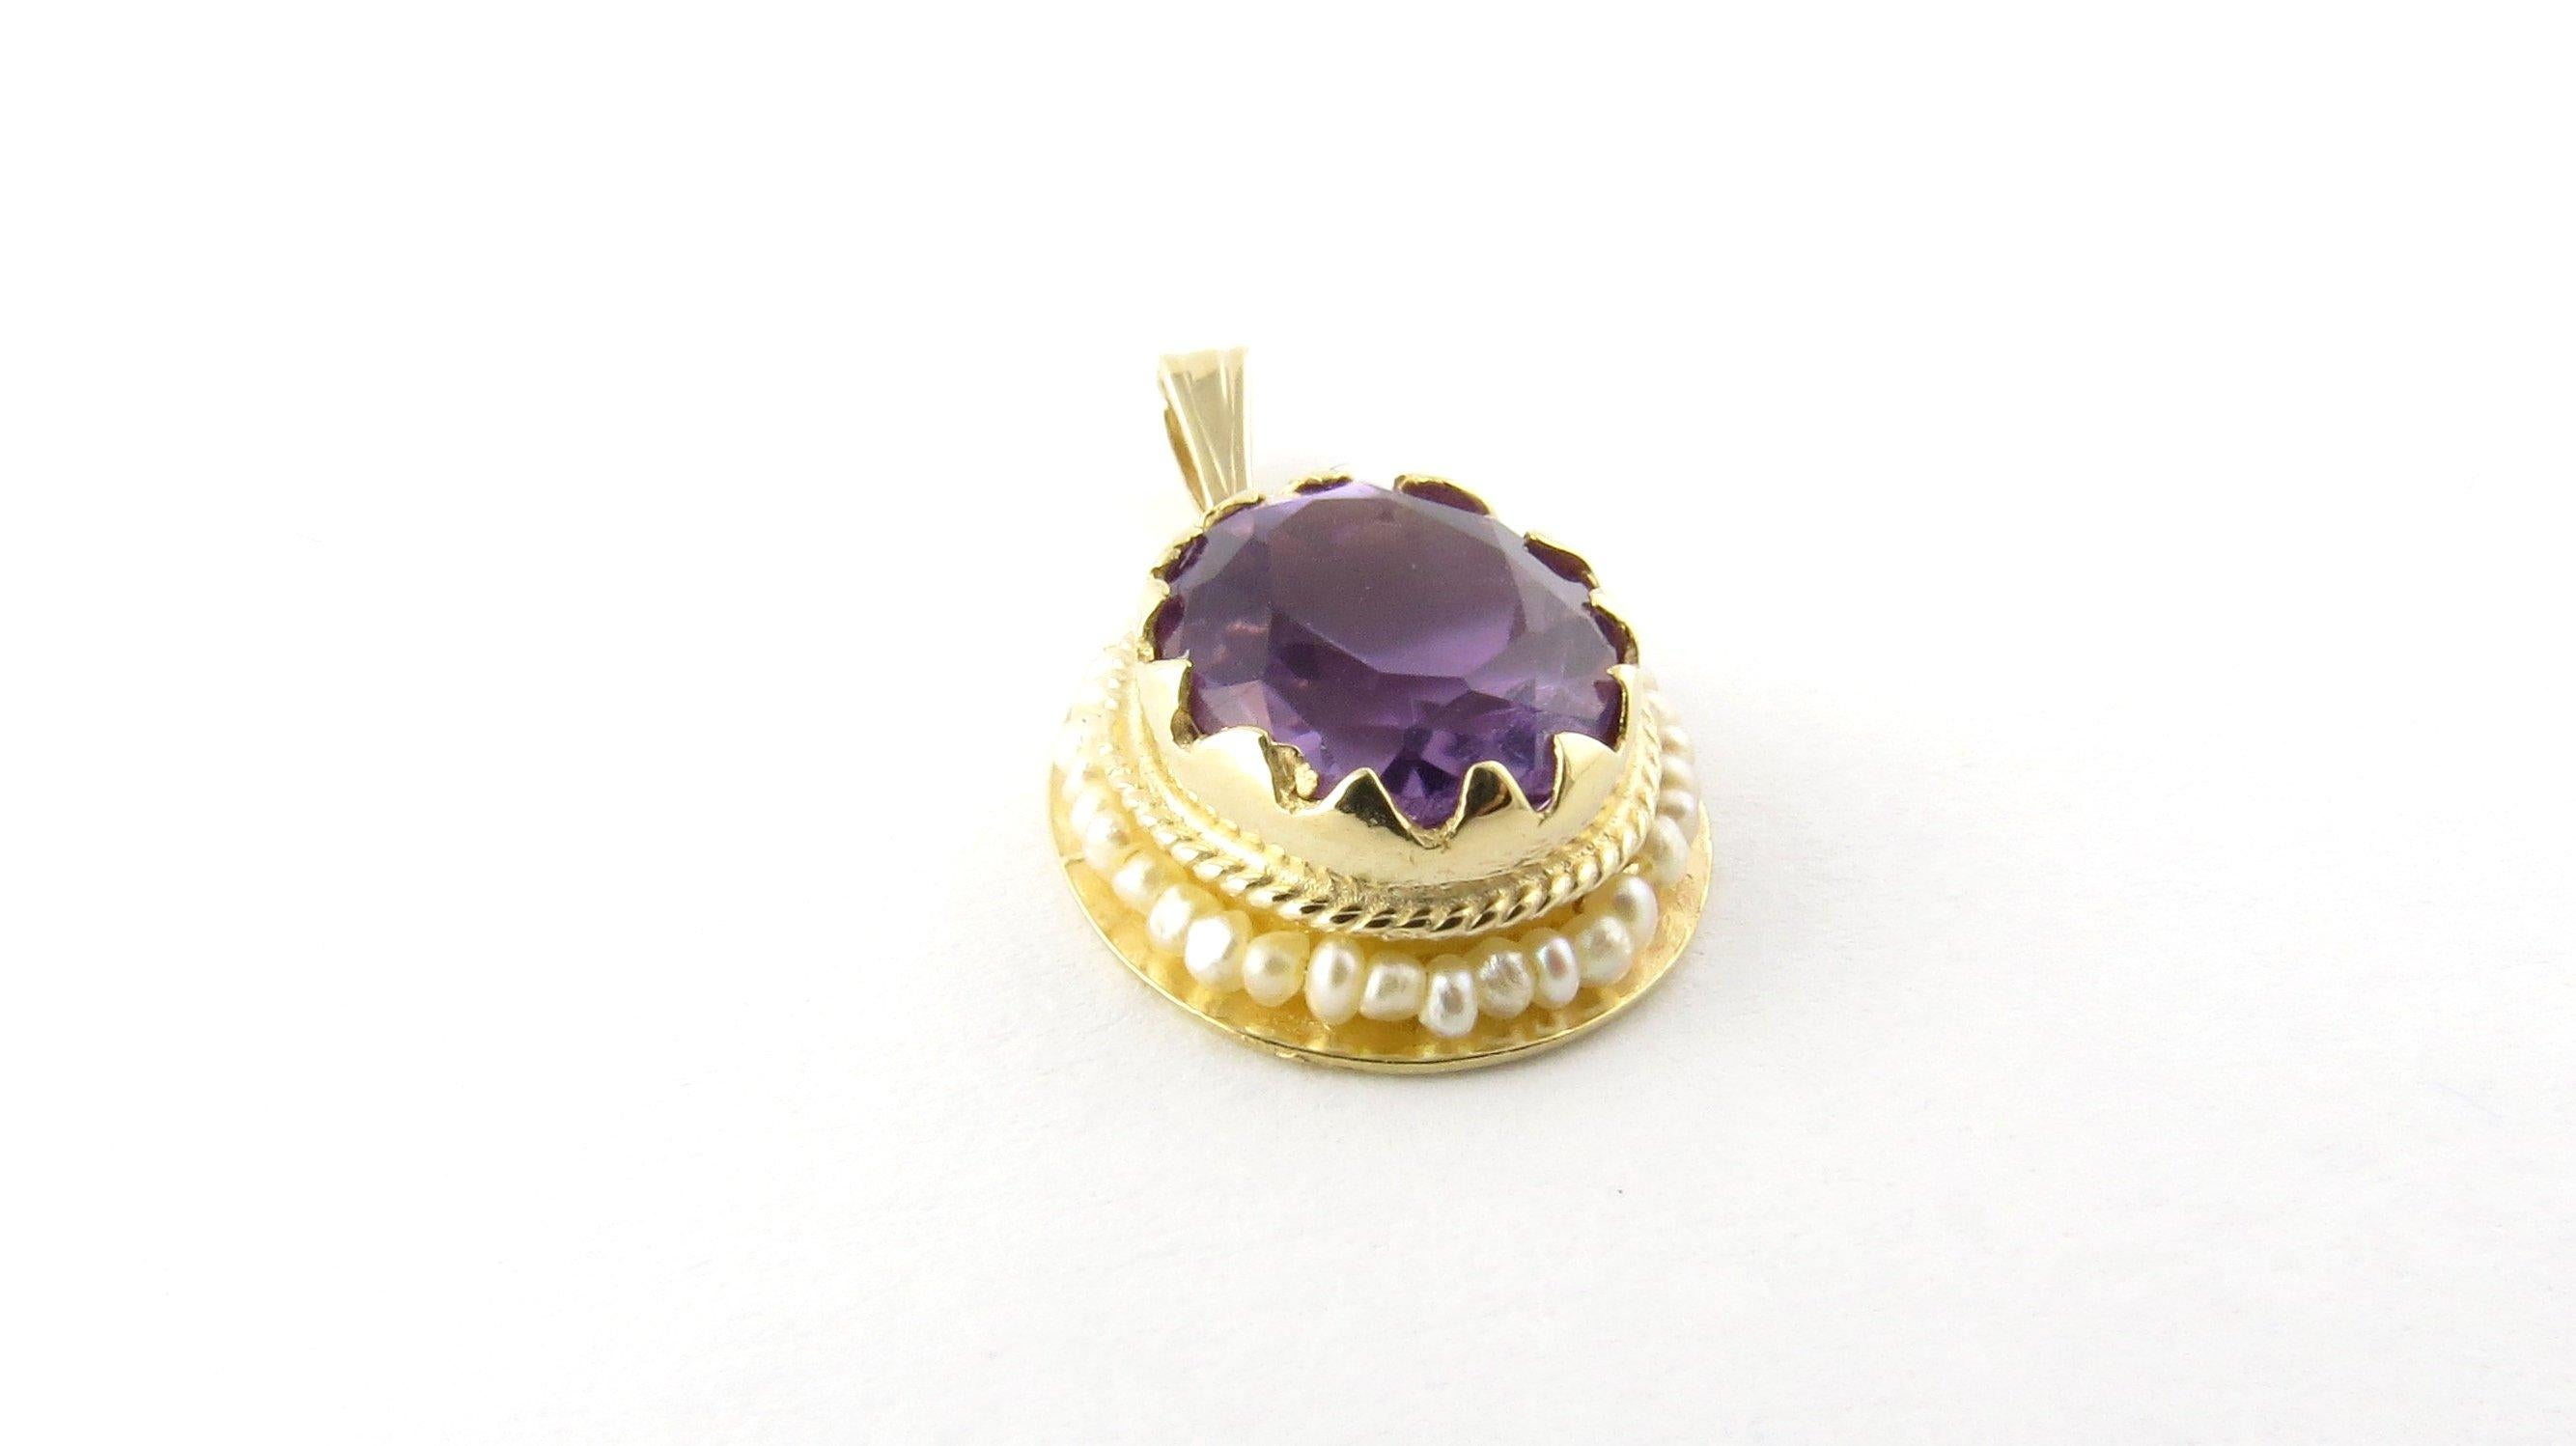 Vintage 14 Karat Yellow Gold Amethyst and Seed Pearl Pendant- 
This lovely pendant features one oval amethyst stone (11 mm x 10 mm) surrounded by delicate seed pearls and set in meticulously detailed 14K yellow gold. 
Size: 17 mm x 12 mm (actual